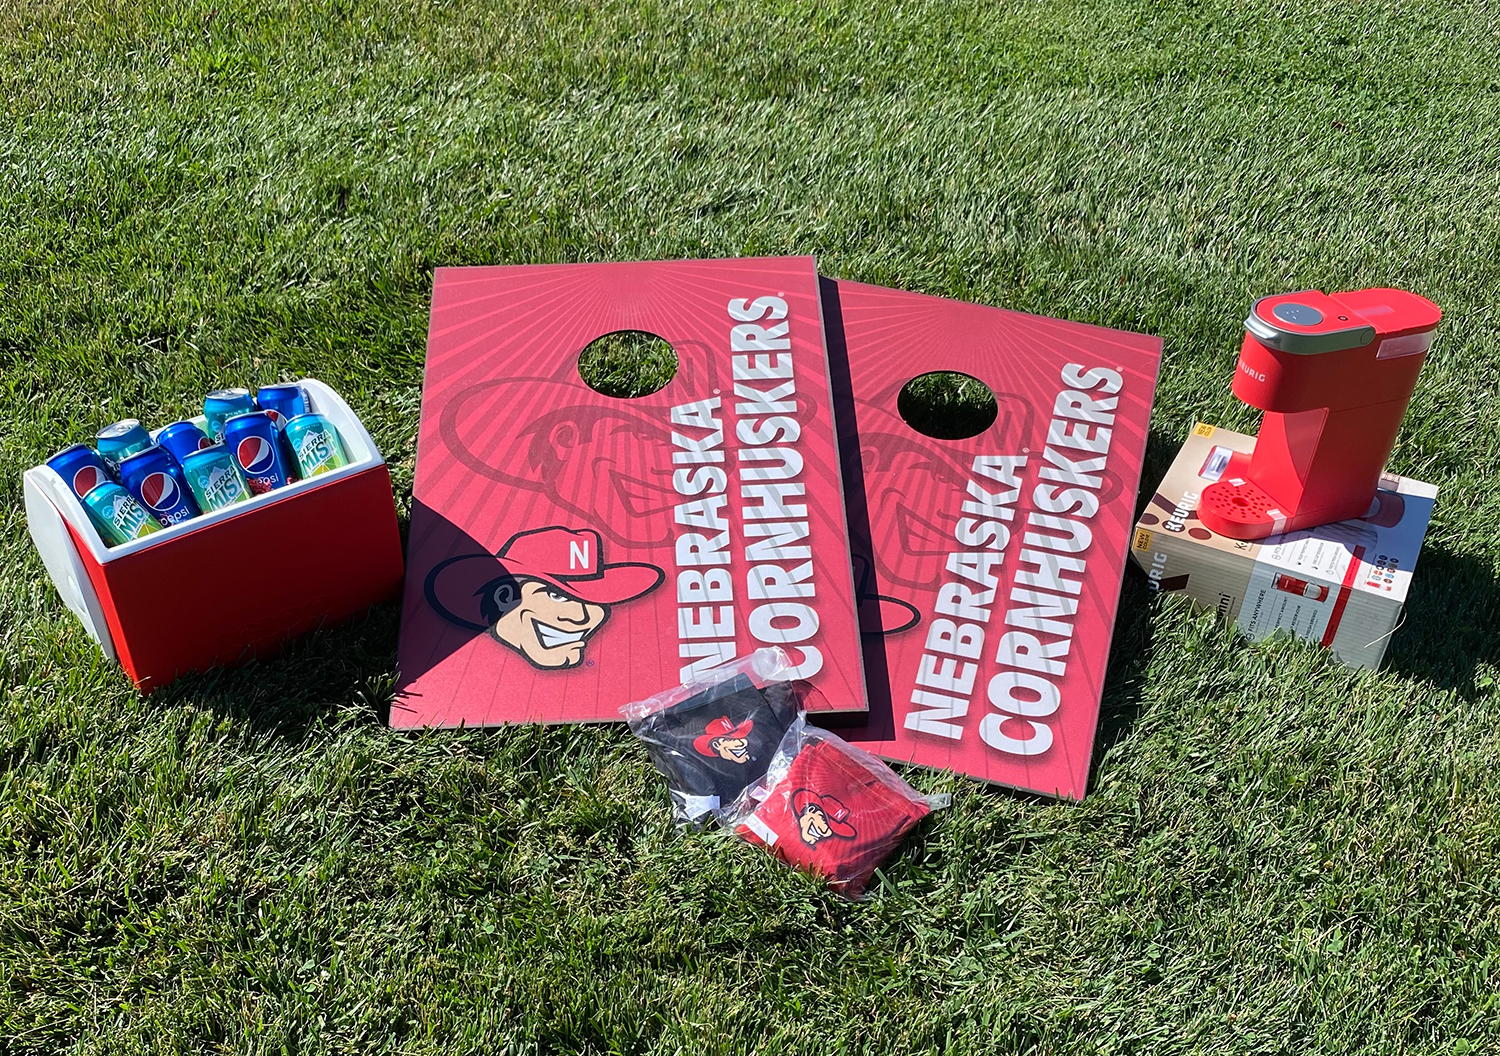 UNL students can be entered to win 1-of-3 great prizes, including a Keurig coffee machine, a Husker cornhole set, and a mini-cooler full of Pepsi by playing the "Huskers, Welcome to Nebraska" contest on Goosechase.